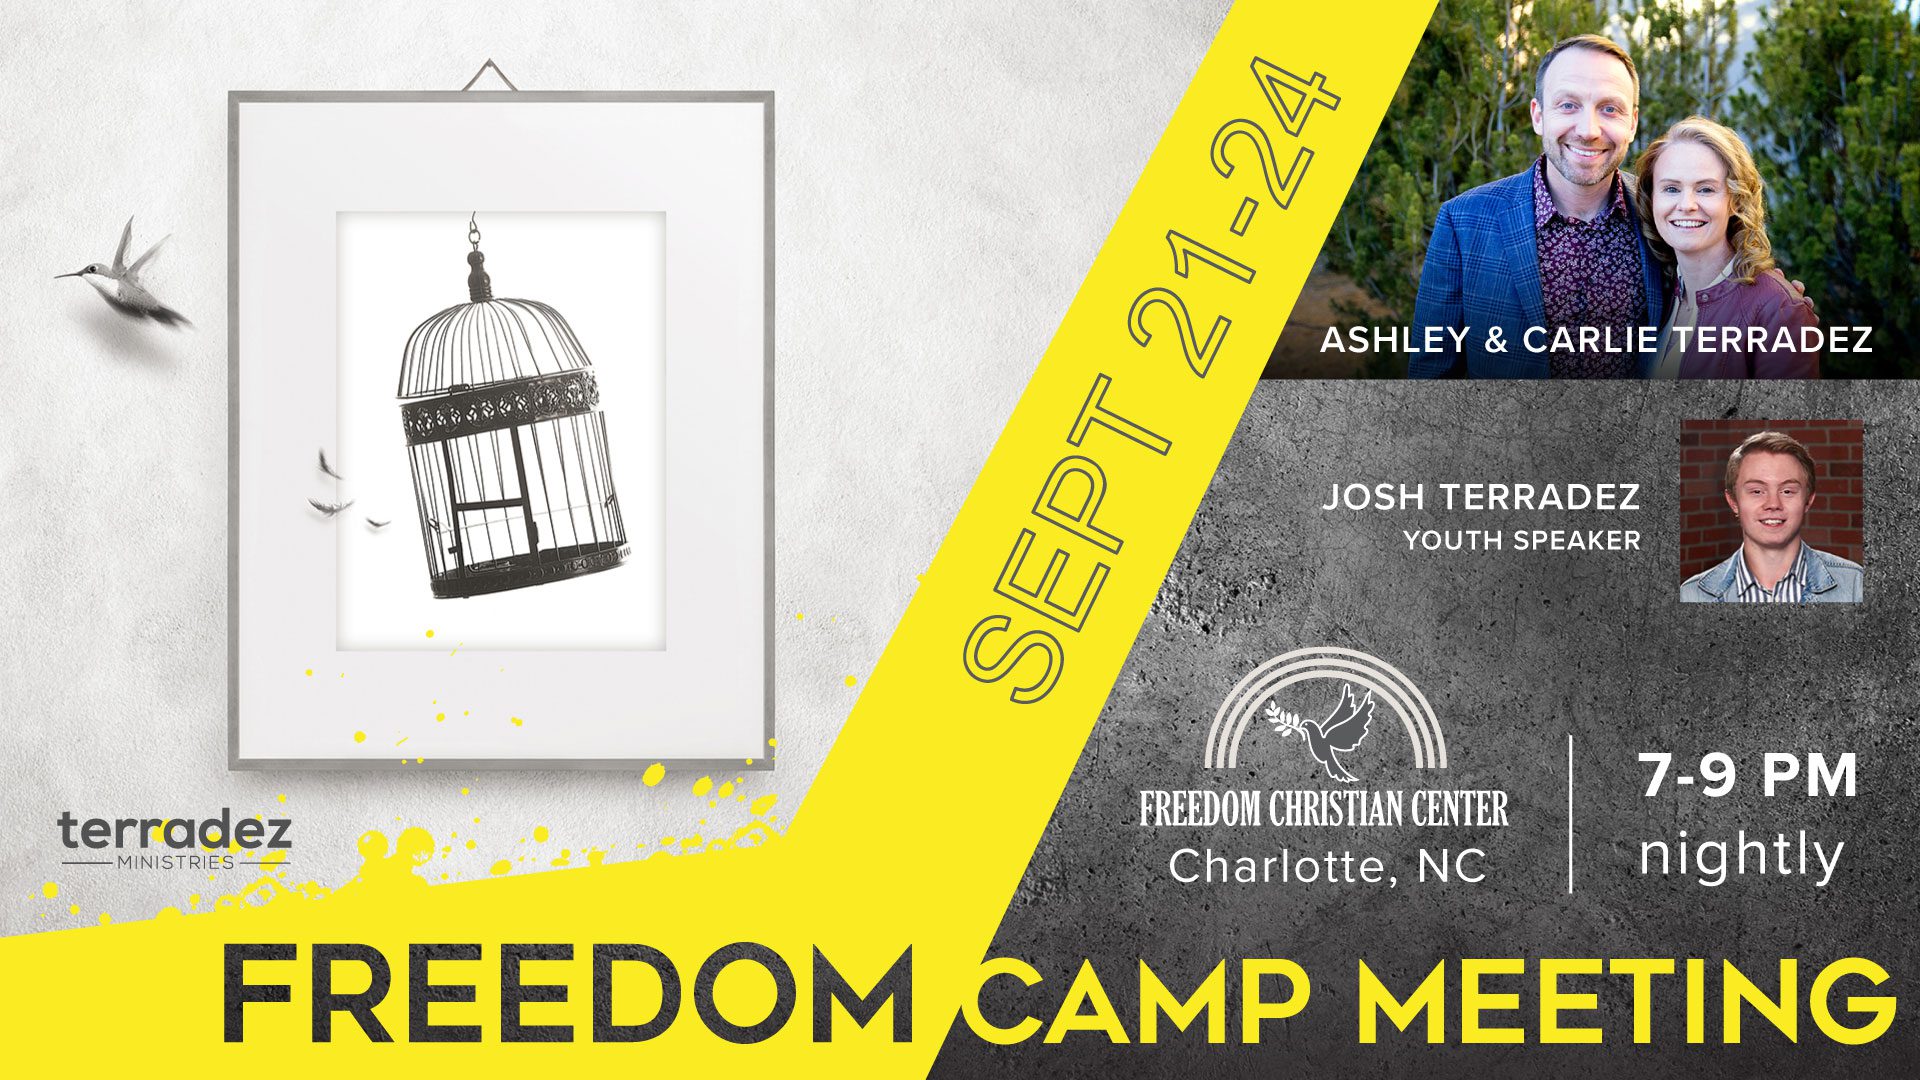 Freedom Camp Meeting 2021 with Ashley and Carlie Terradez on September 21-24 in Charlotte, NC.